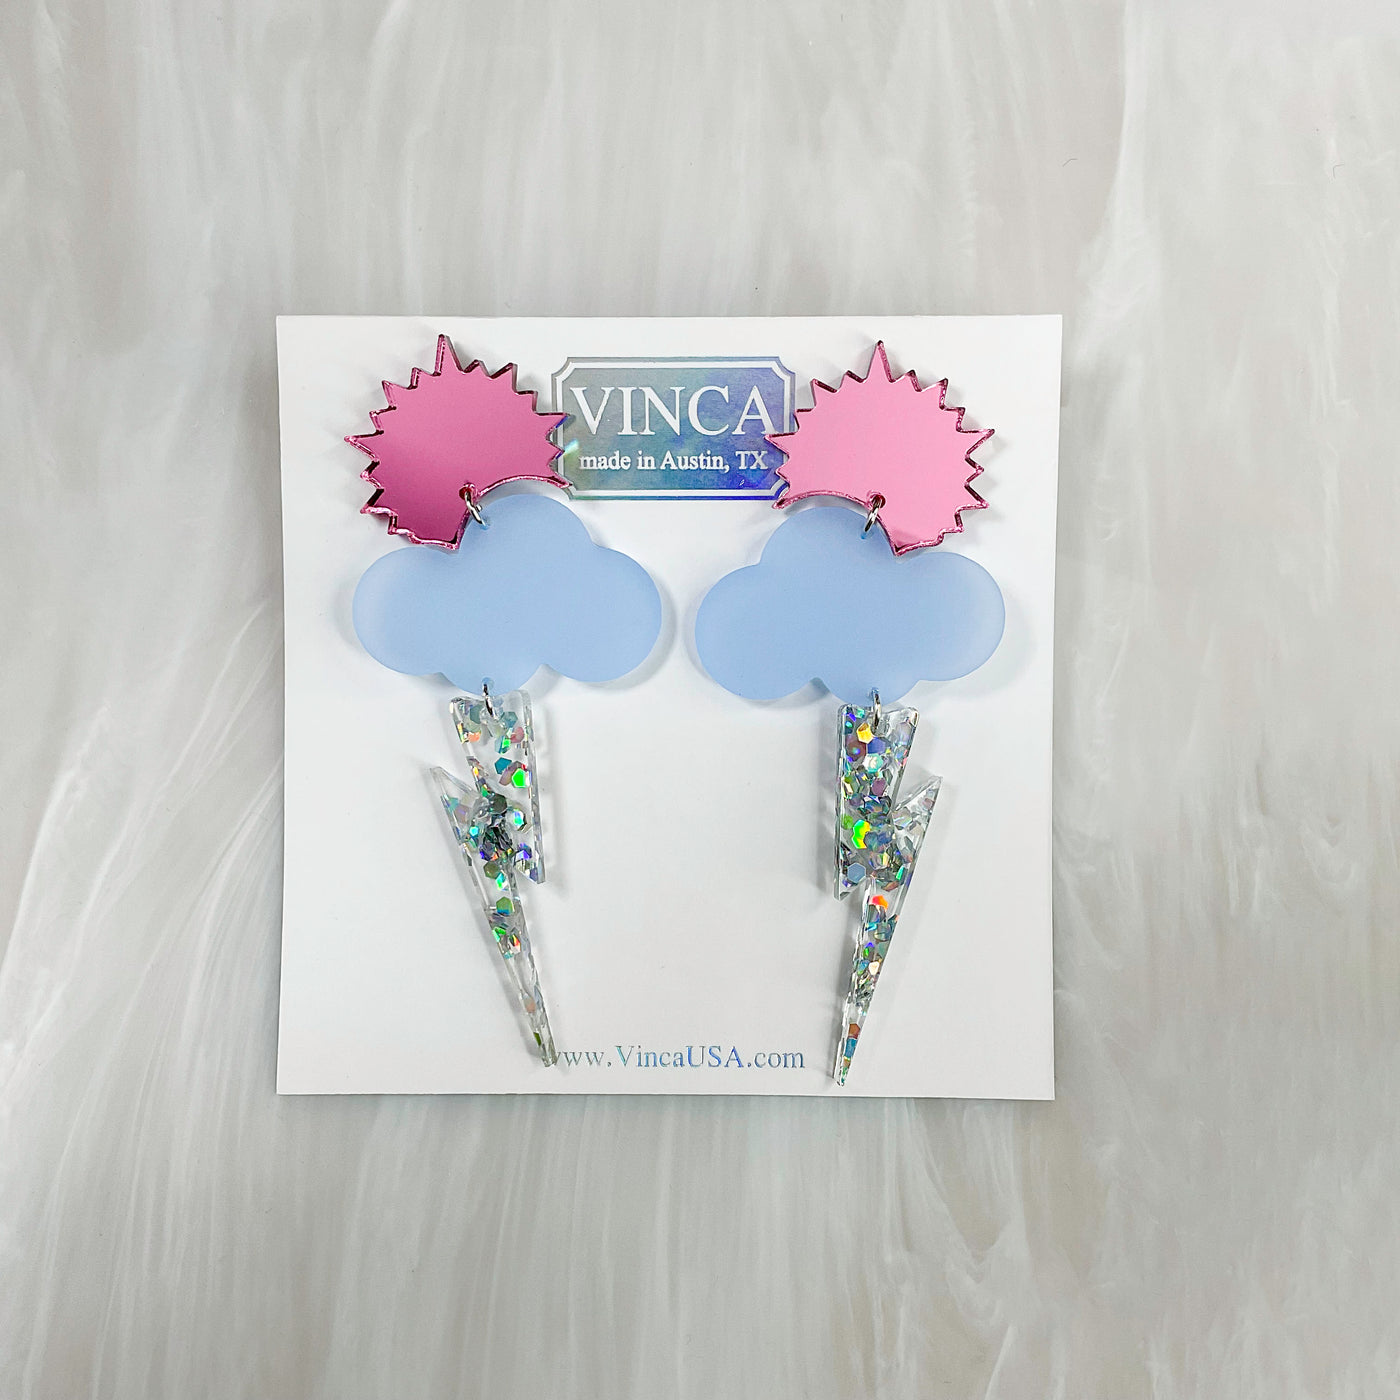 SALE! Partly Cloudy Earrings - Chance of Party